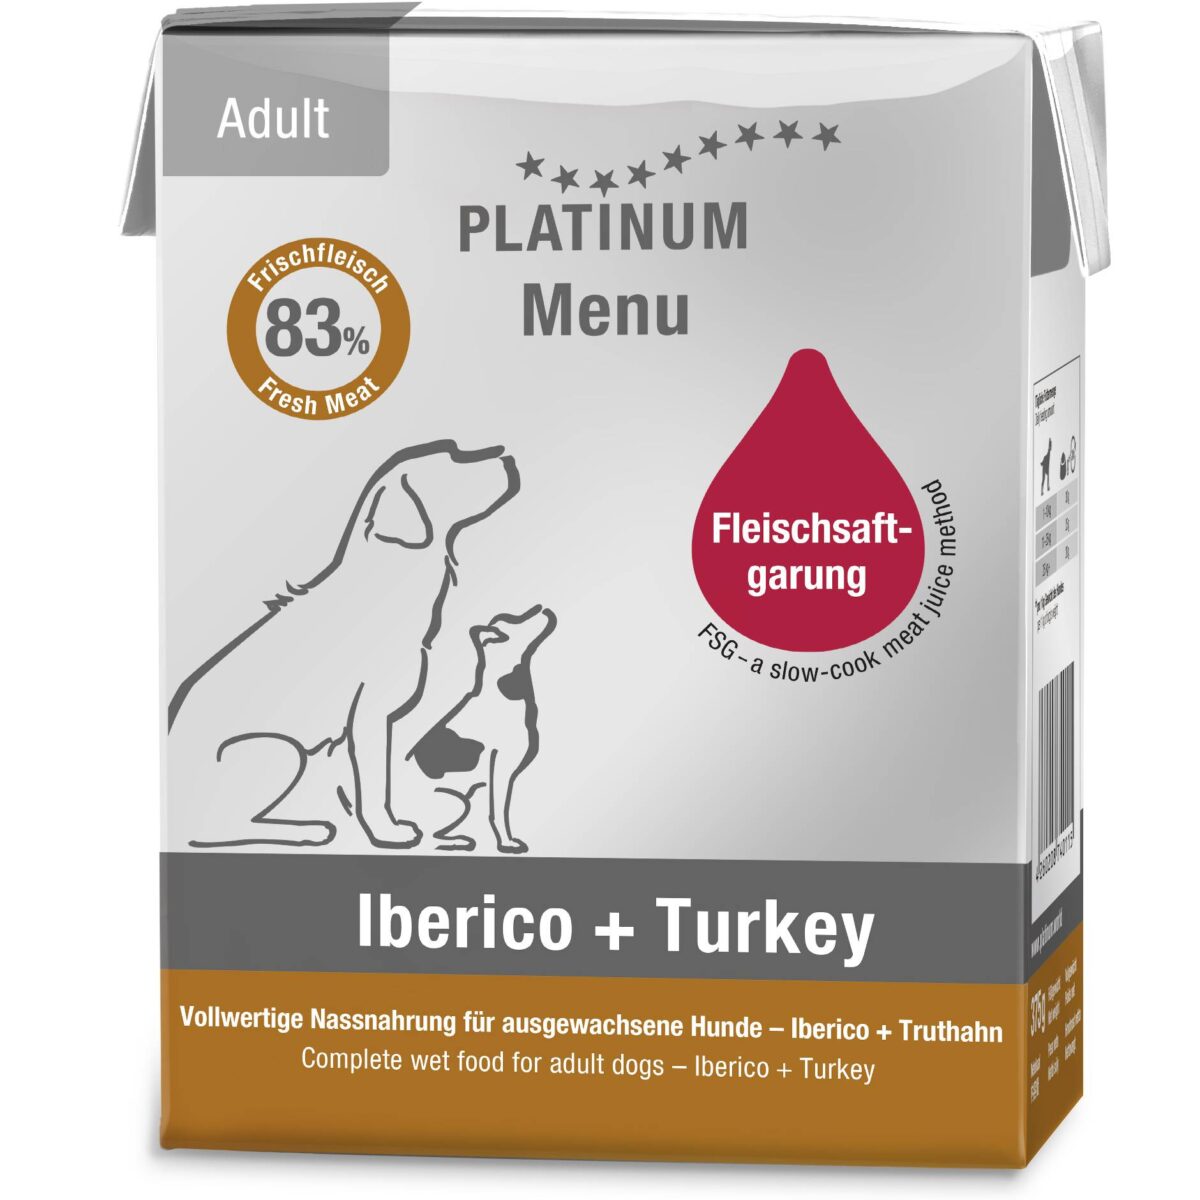 2-Iberico-Turkey-Pack3-frontal-right-view